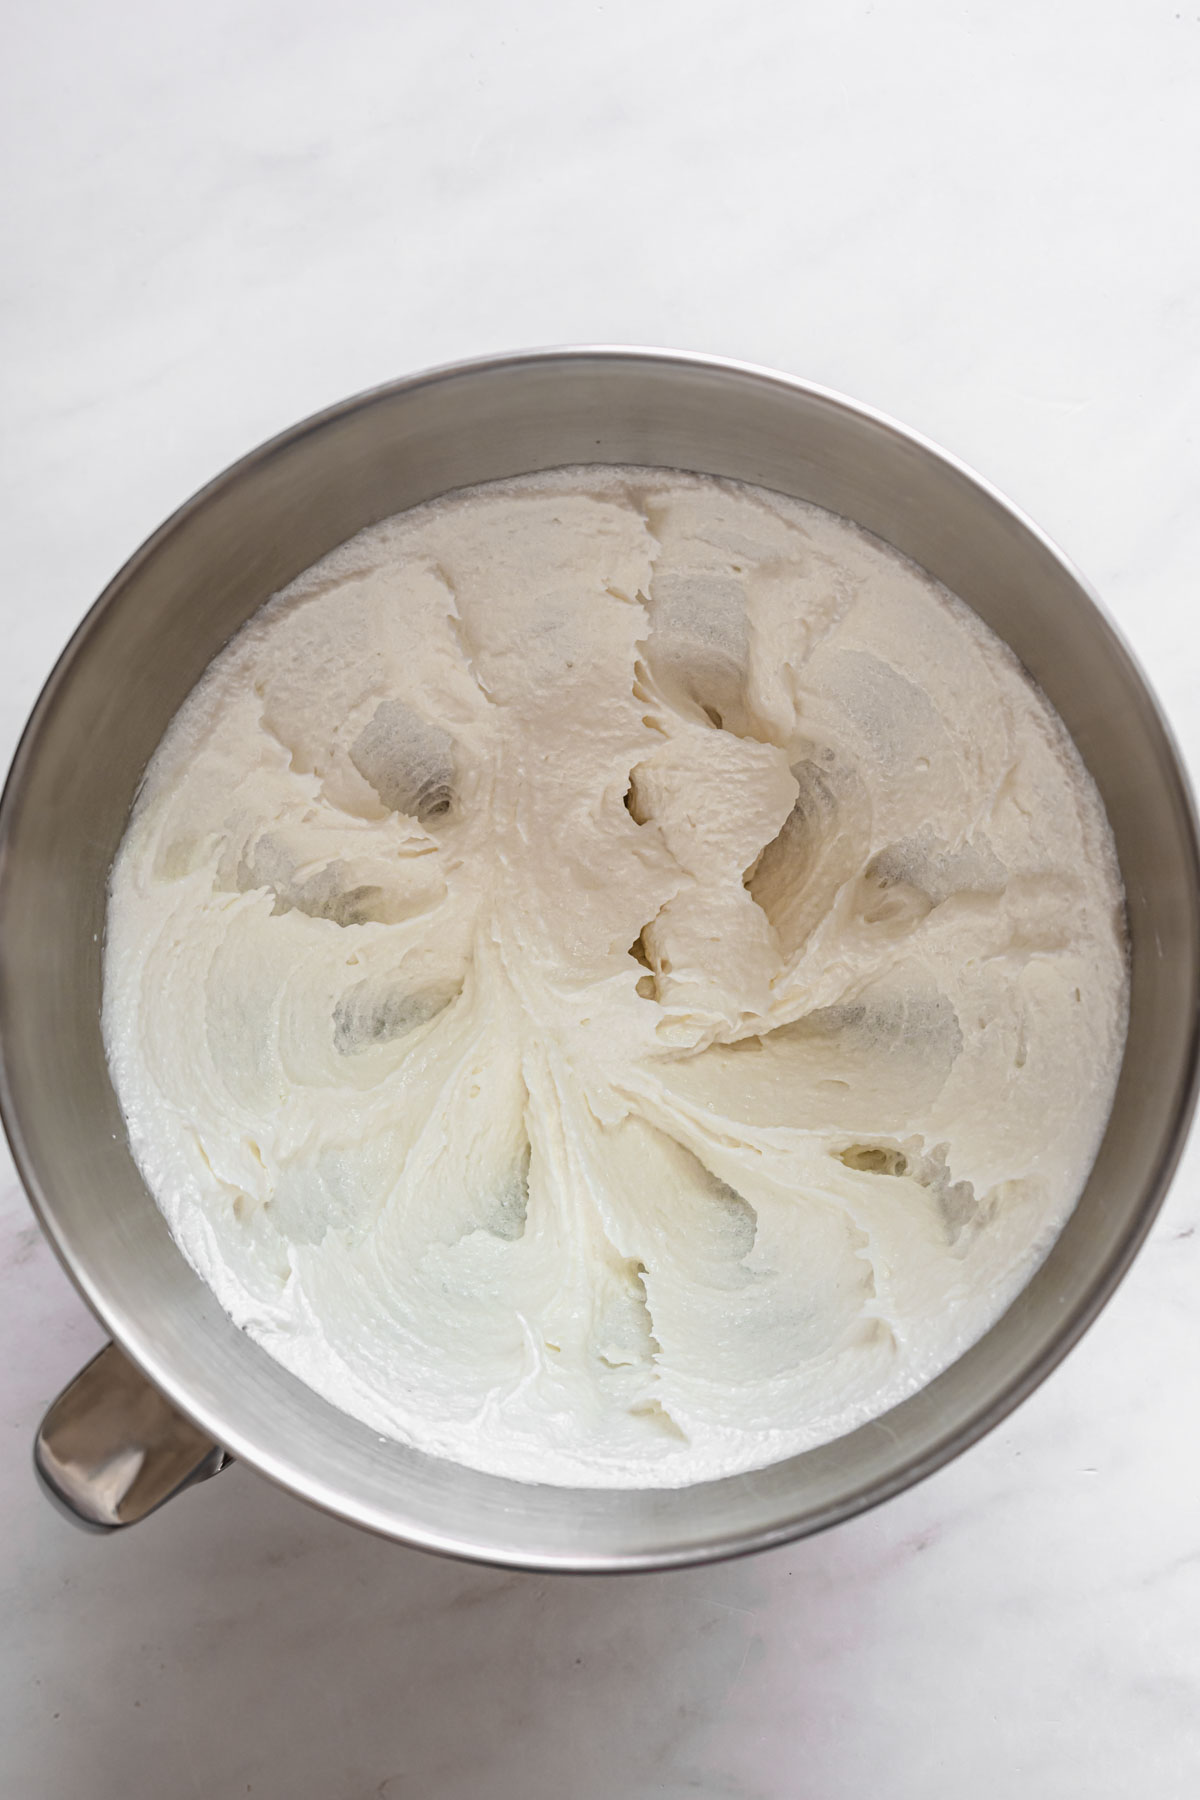 The first ingredients of the cupcake batter whipped together in the bowl of a stand mixer